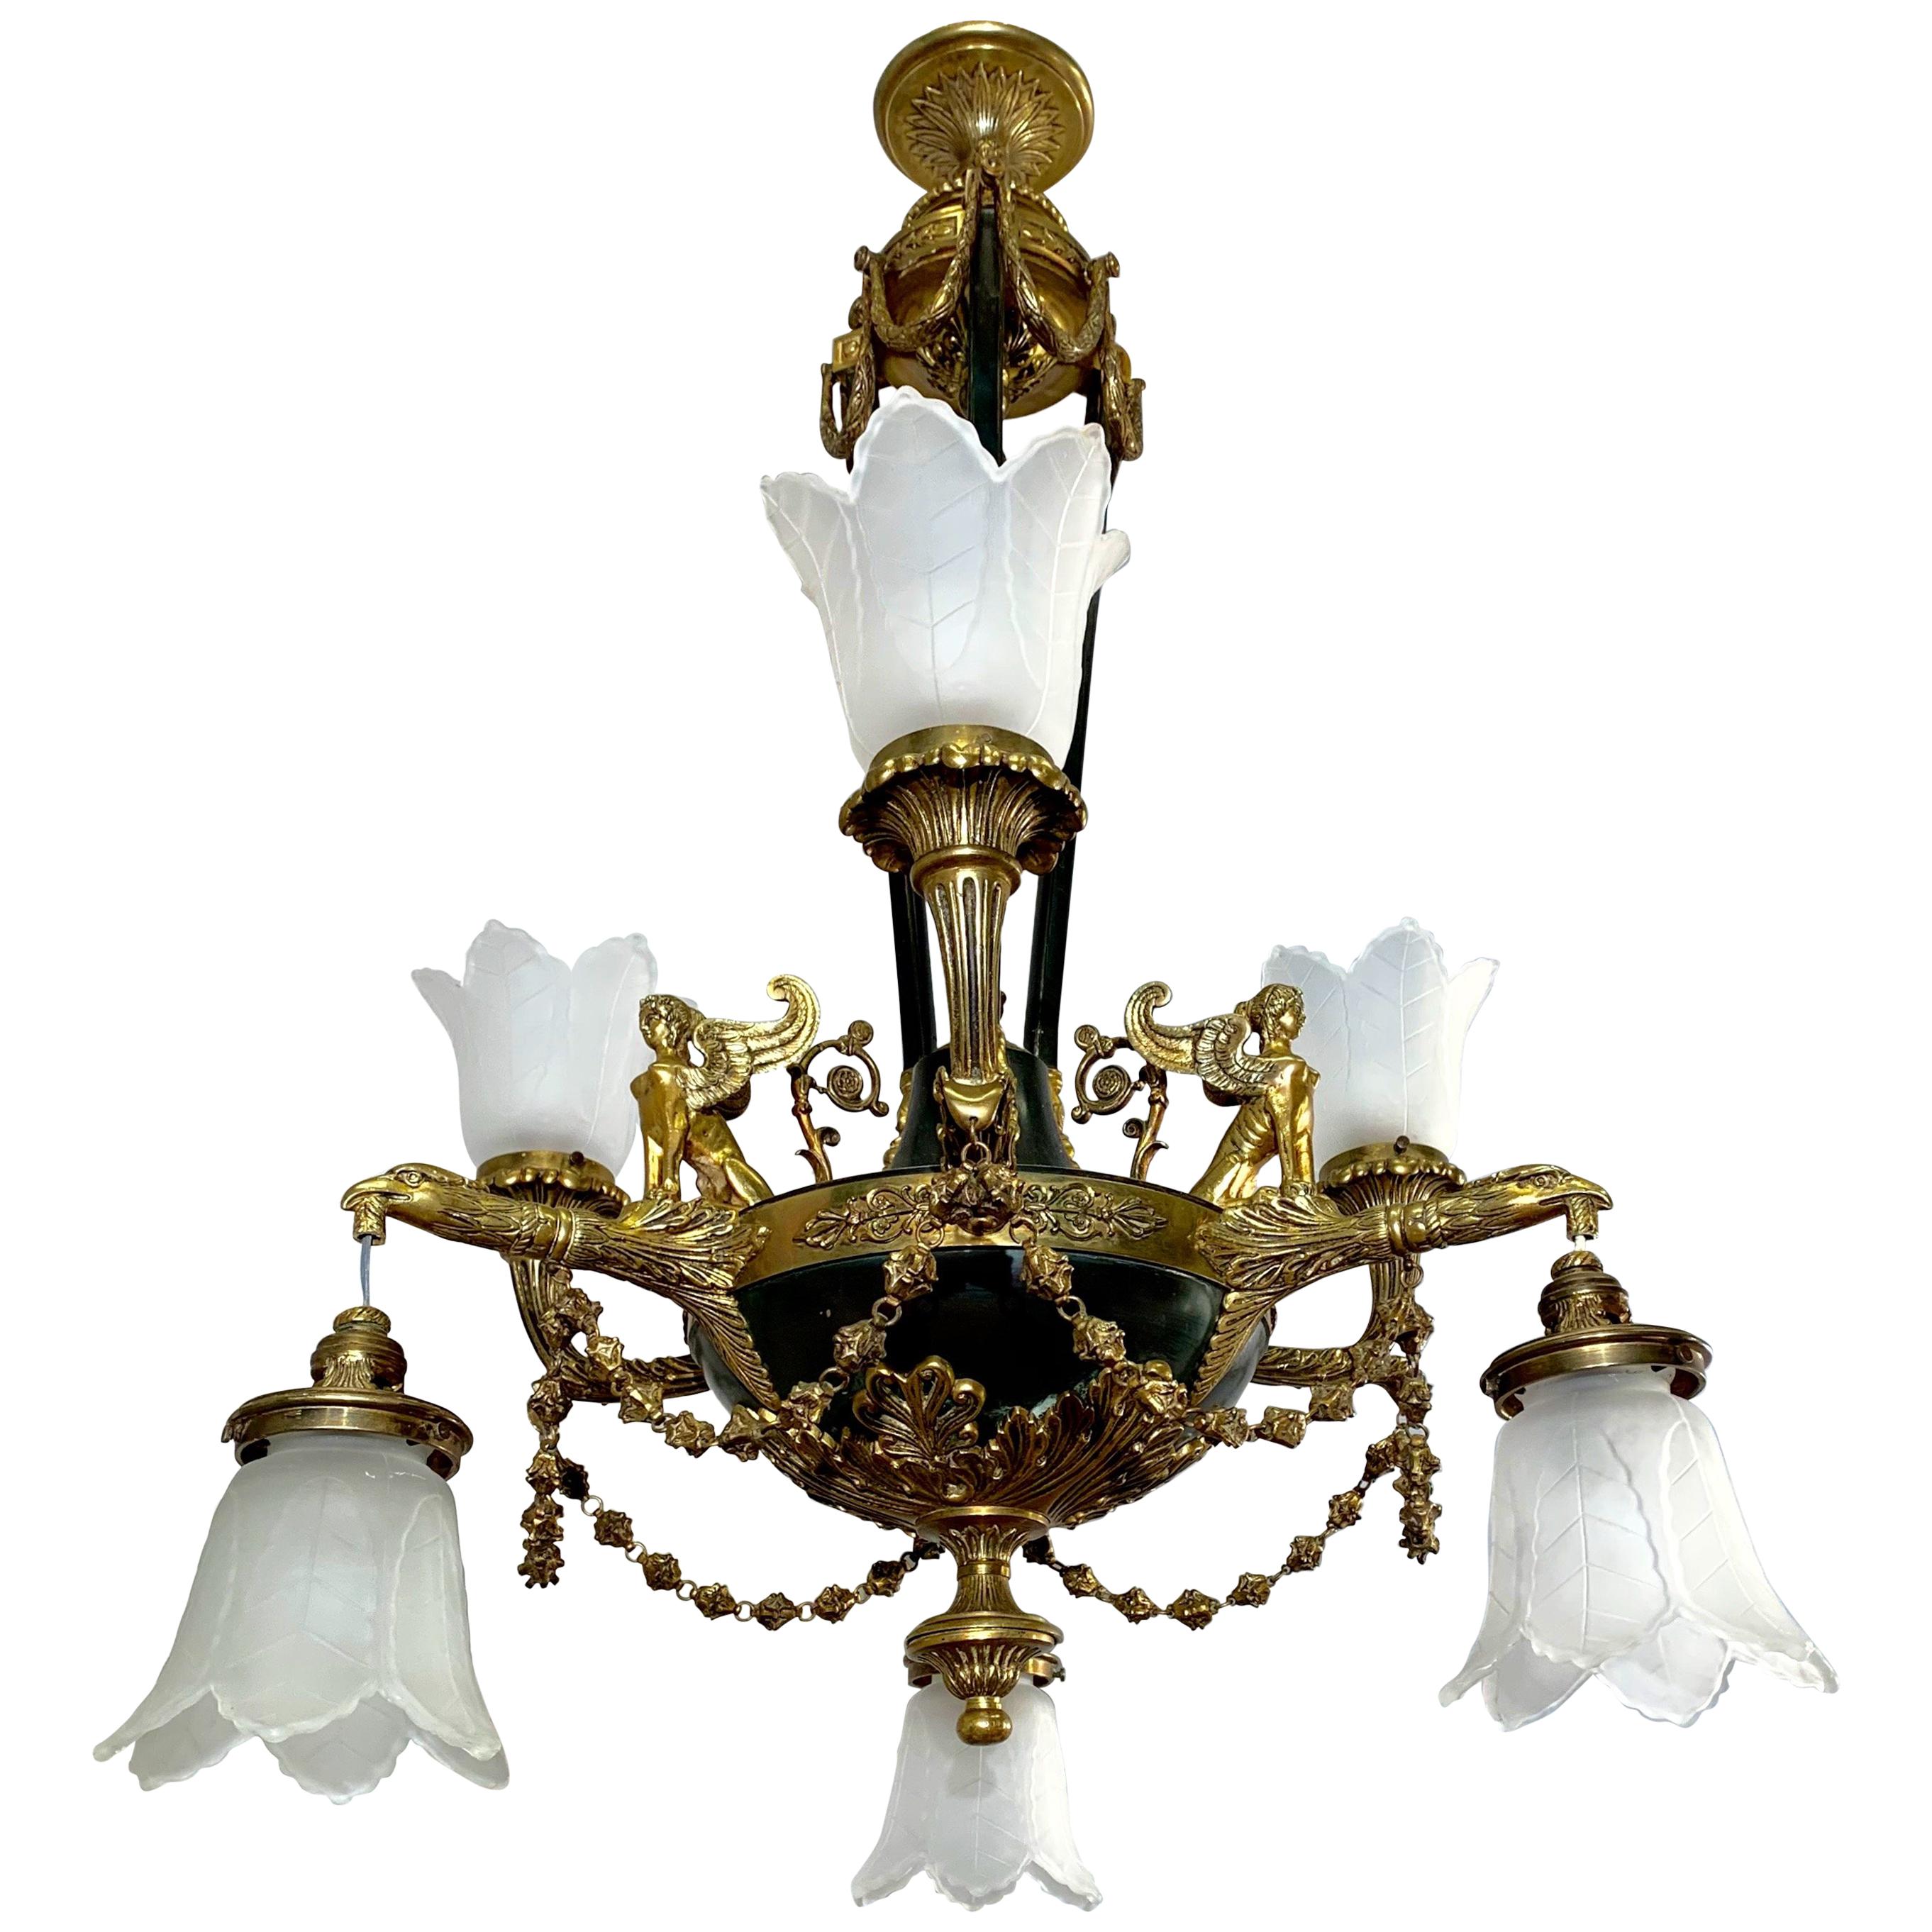 Antique French Empire Style Gilt Bronze Chandelier with Sphinx & Eagle Sculpture